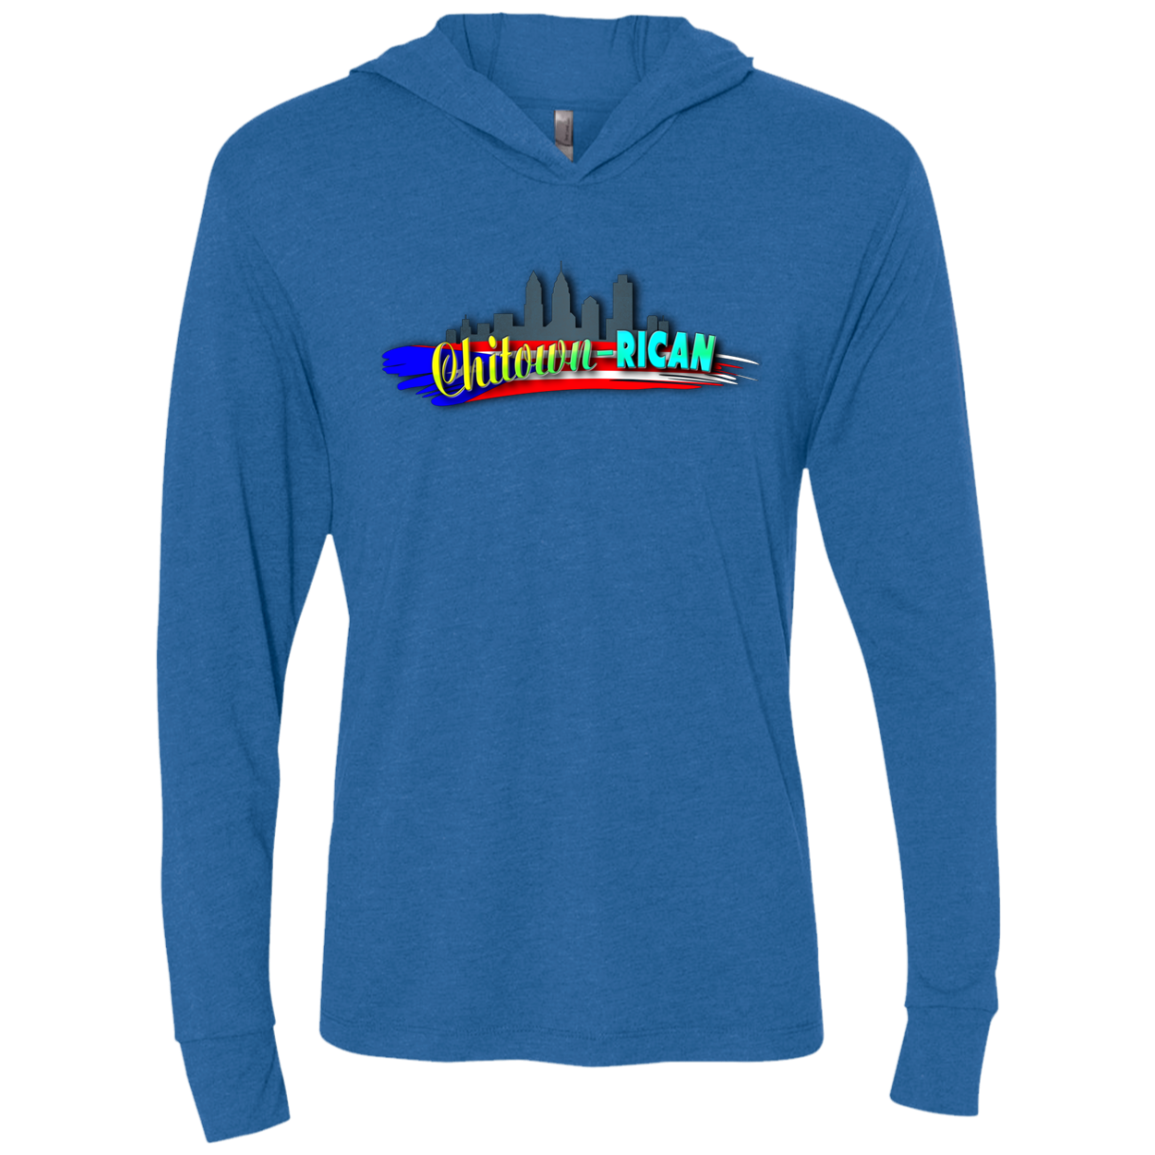 Chitown Rican Unisex Triblend LS Hooded T-Shirt - Puerto Rican Pride